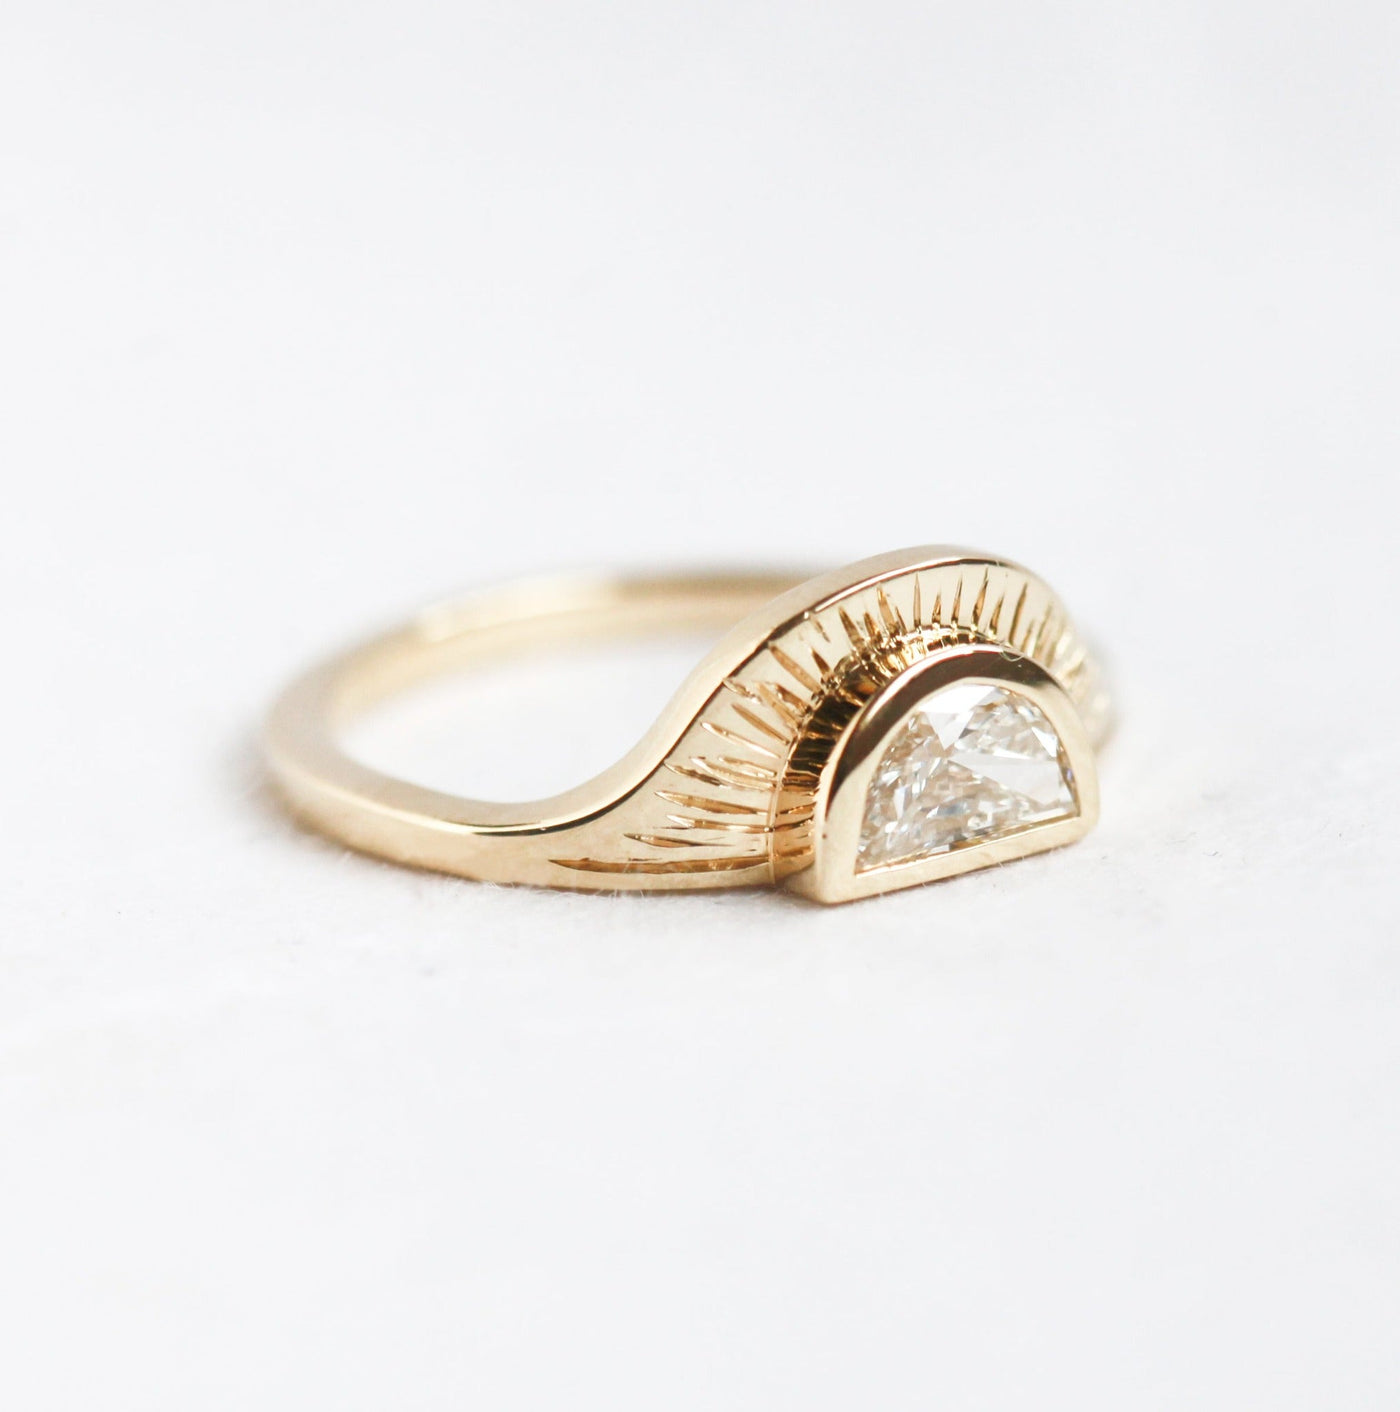 Unique 14k gold ring with a round white diamond in a half moon shape and sun rays engraved into the ring texture